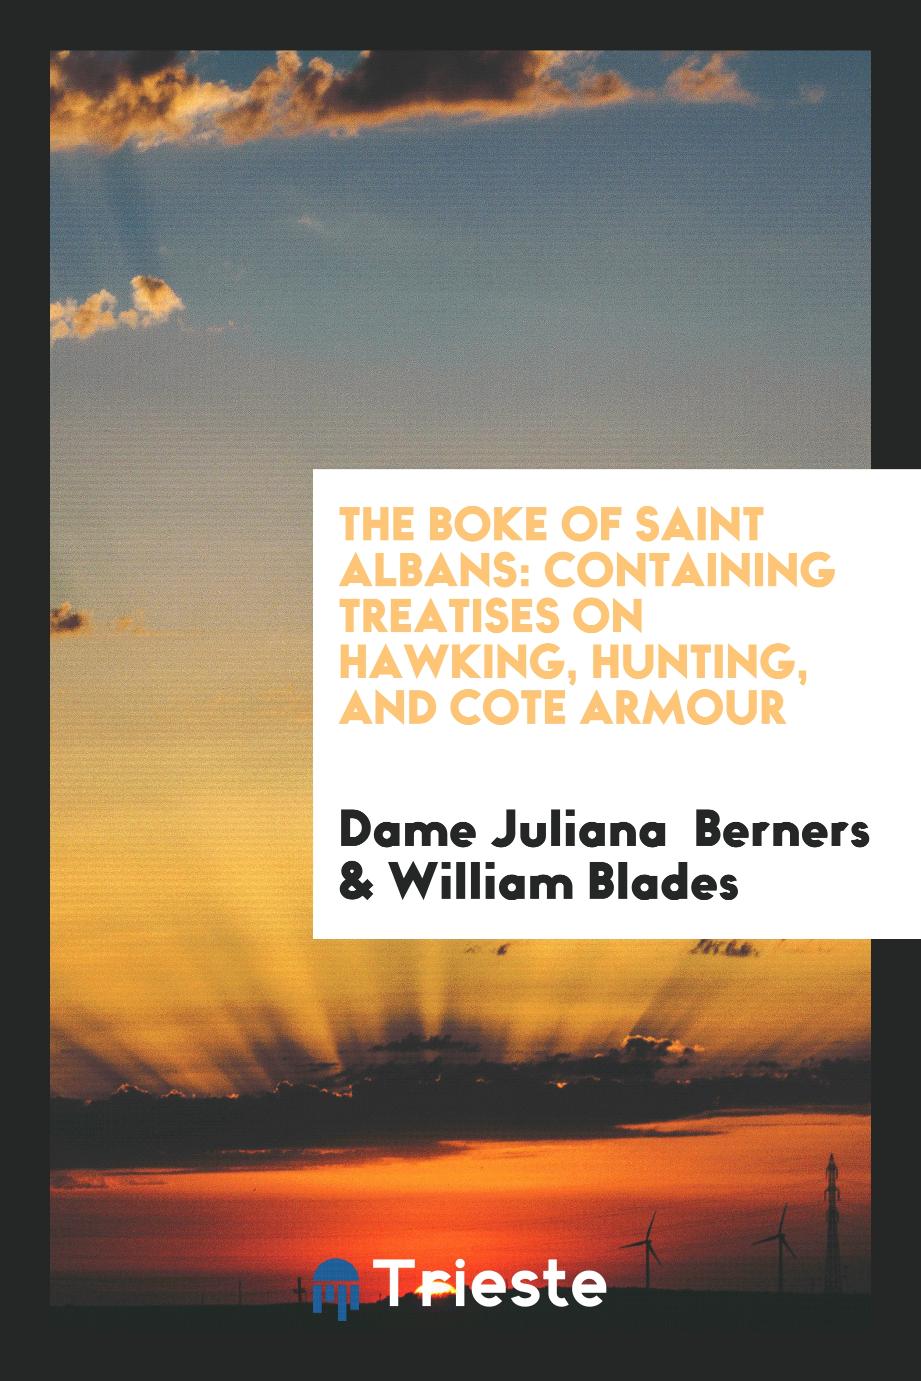 The Boke of Saint Albans: Containing Treatises on Hawking, Hunting, and Cote Armour